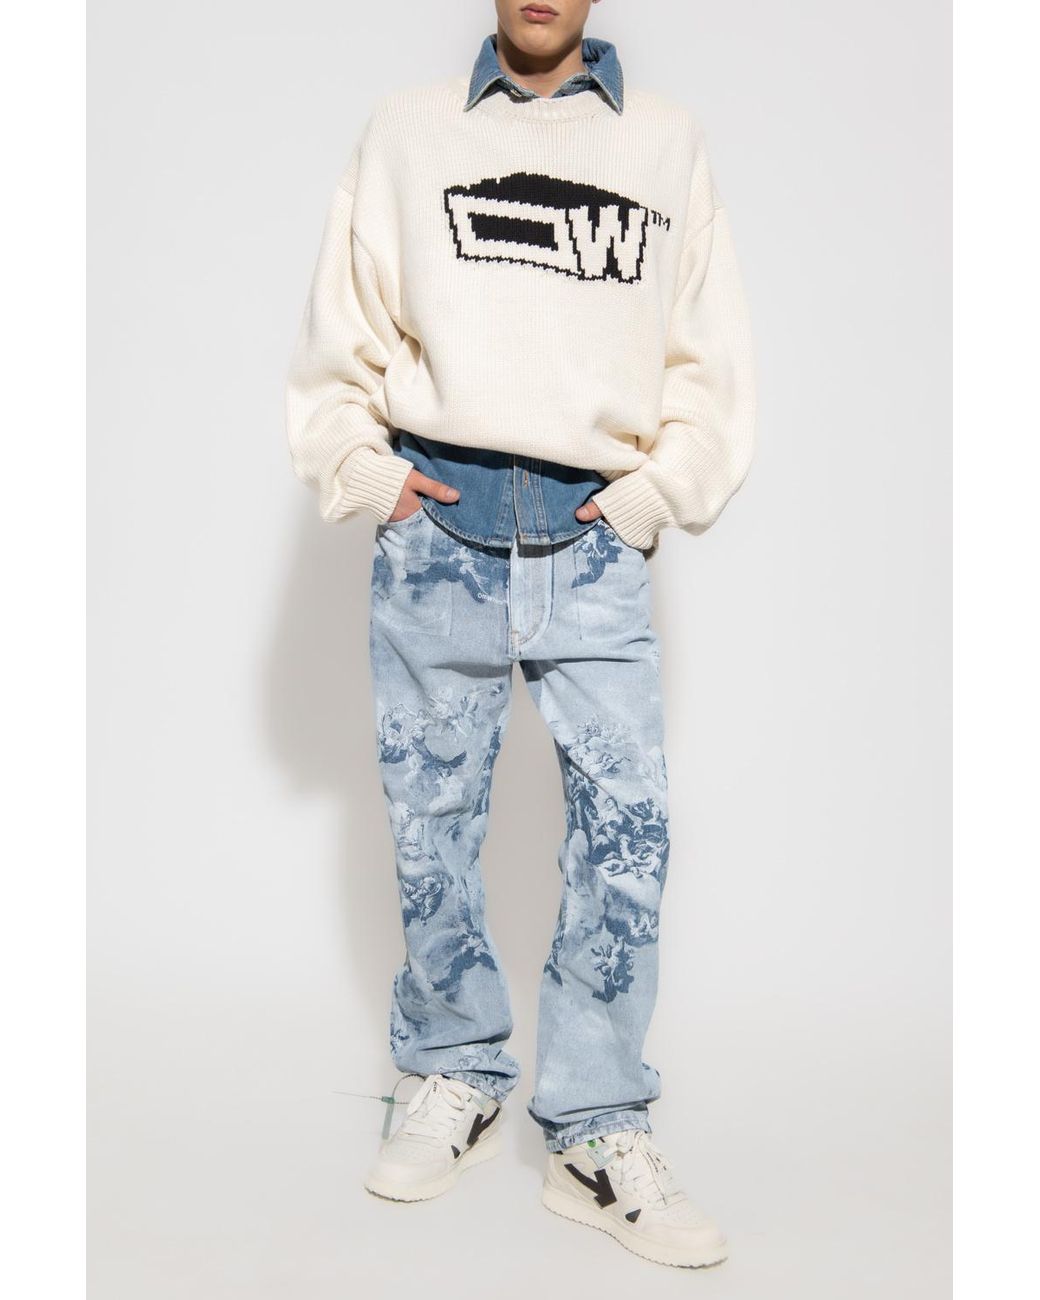 Off-White c/o Virgil Abloh Embroidered Jeans "Baggy" Floral Light  Wash (Size 25)